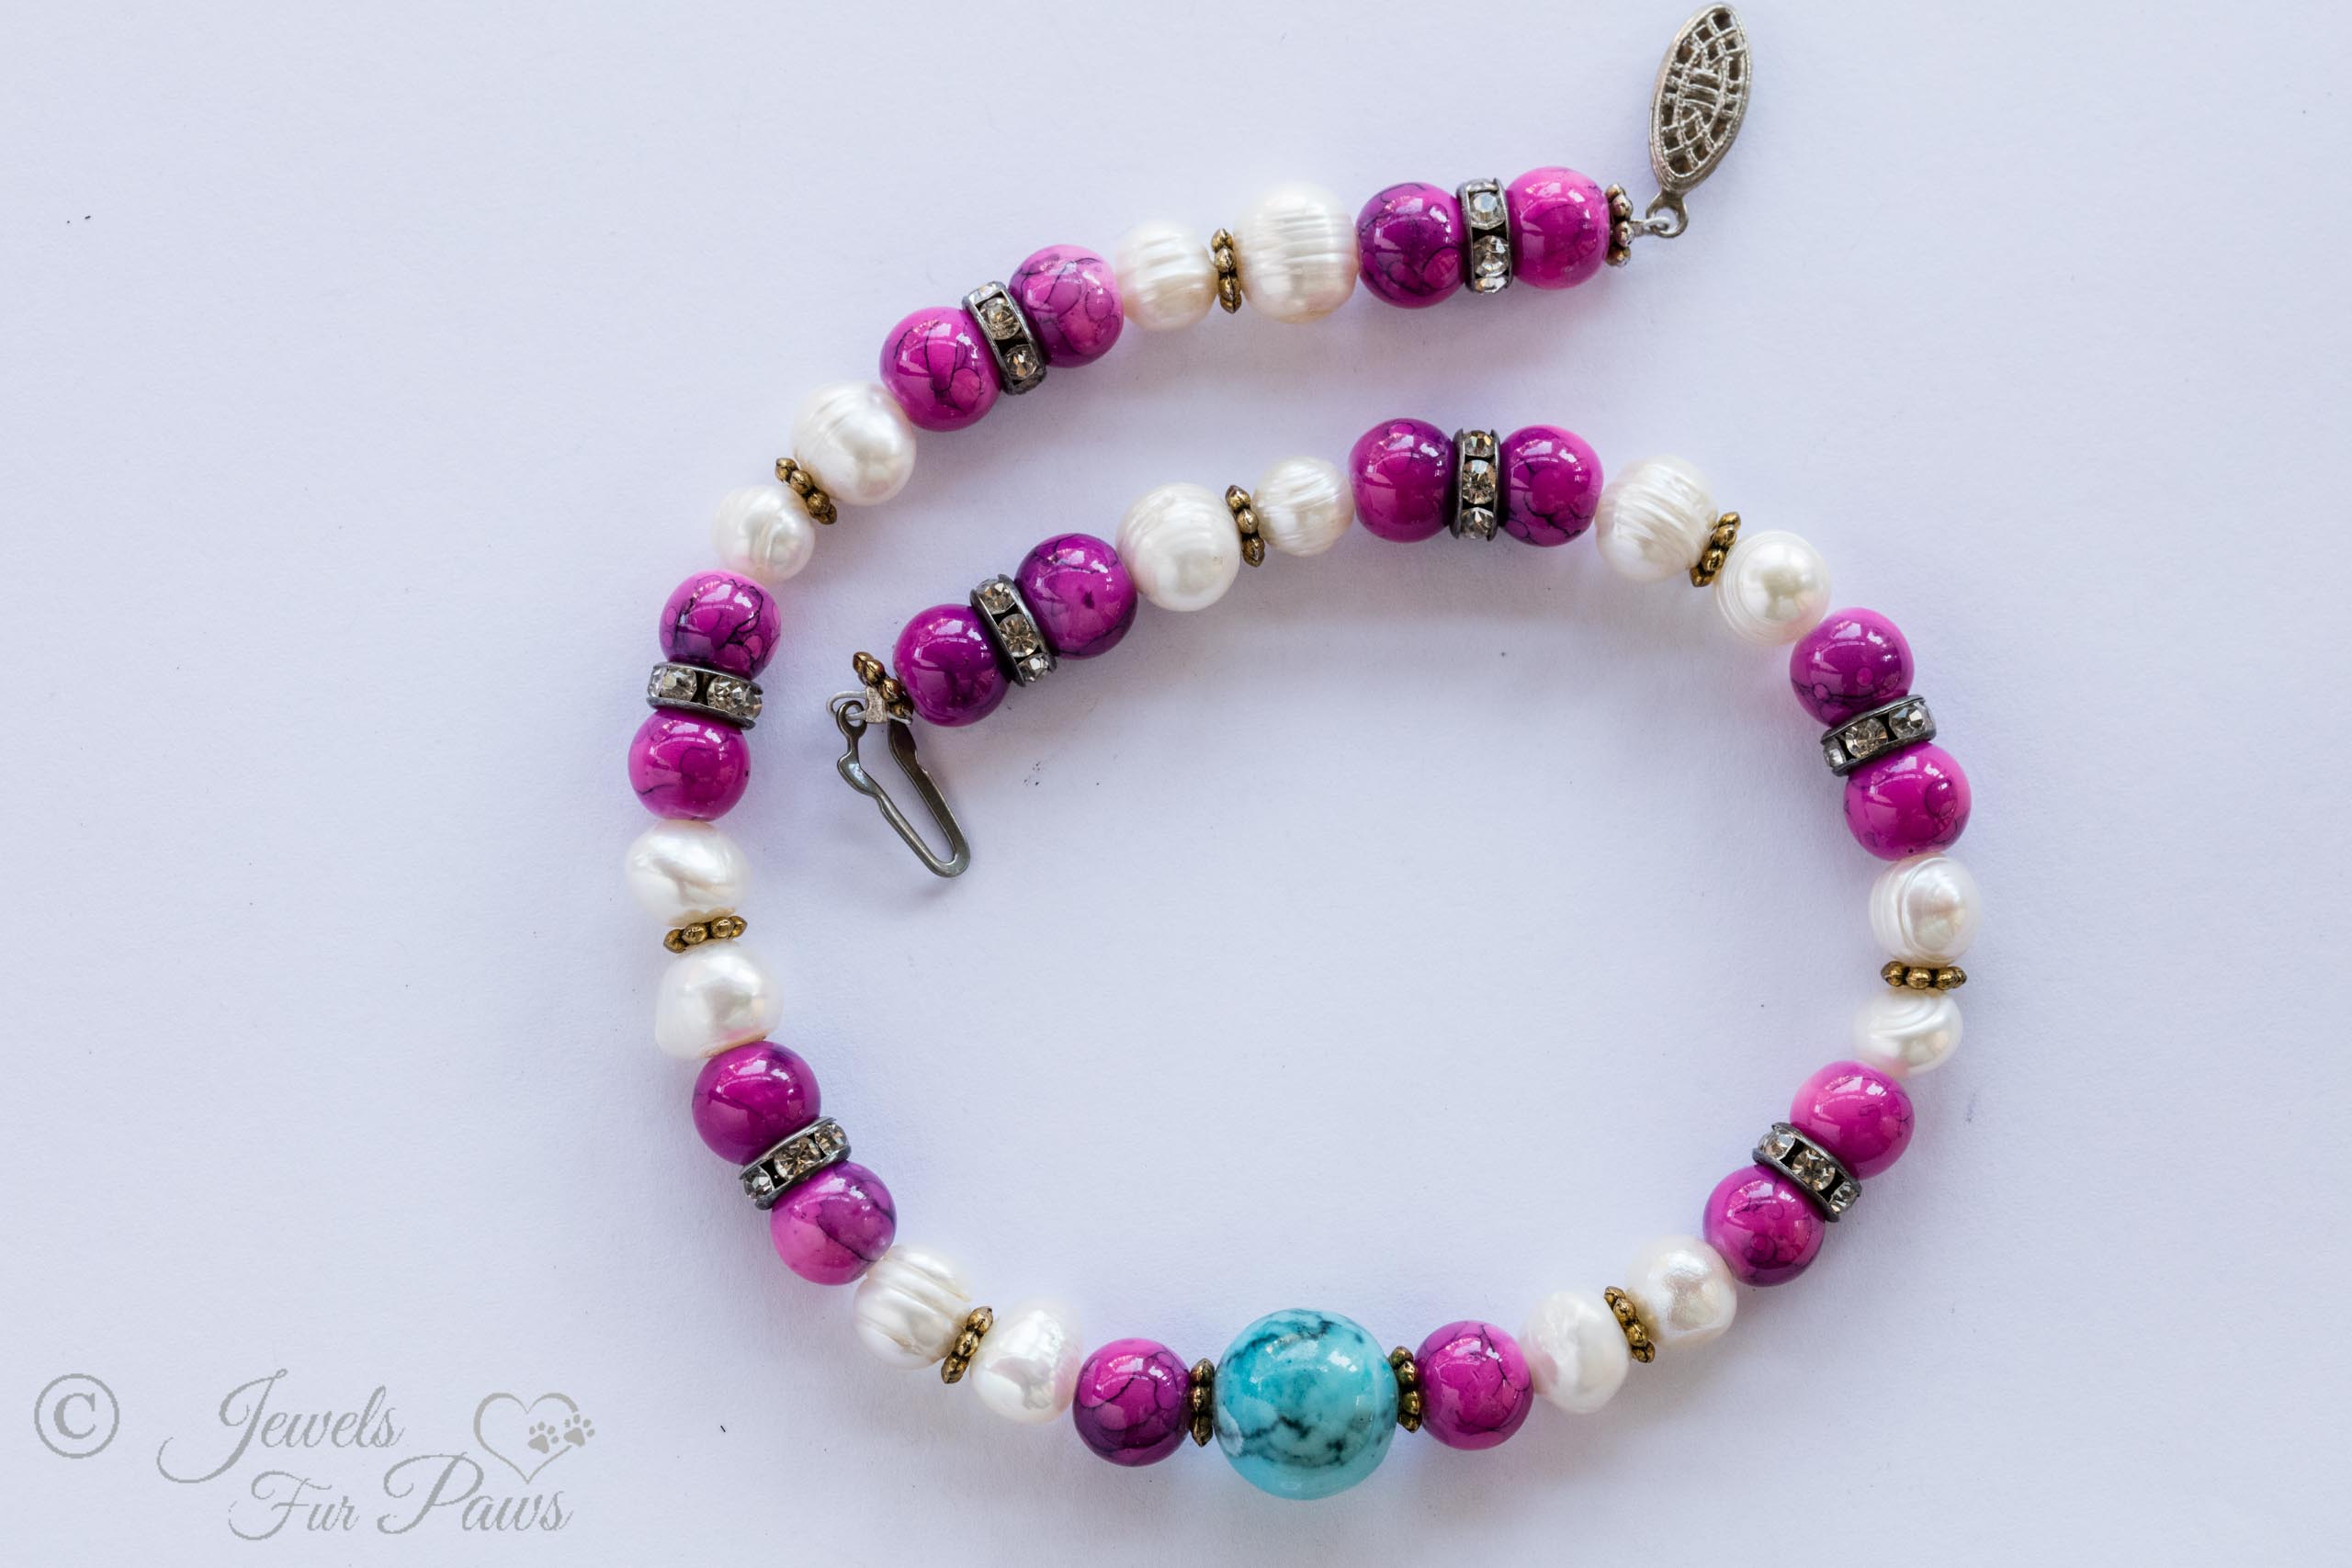 dog cat pet necklace baroque pearls fuschia pink marbleized beads swarovski crystal spacers and large turquoise marble bead in center on white background